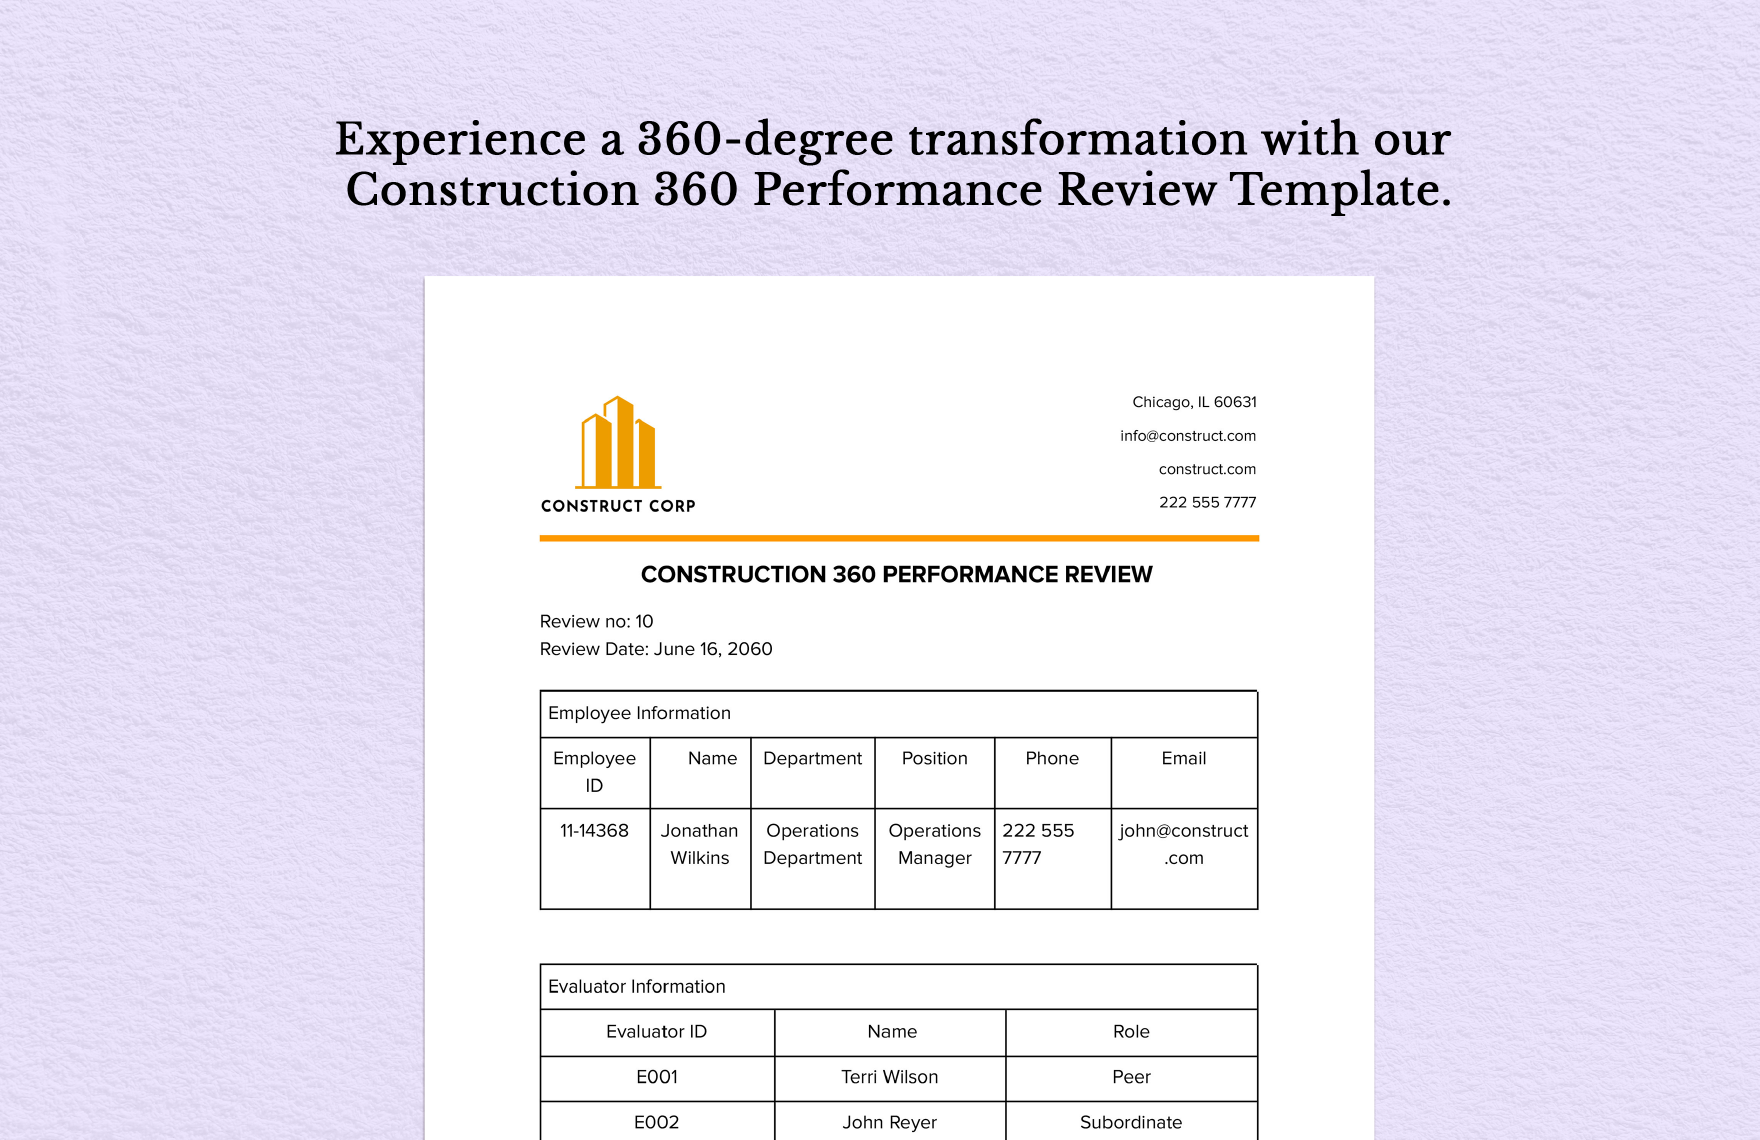 Construction 360 Performance Review 